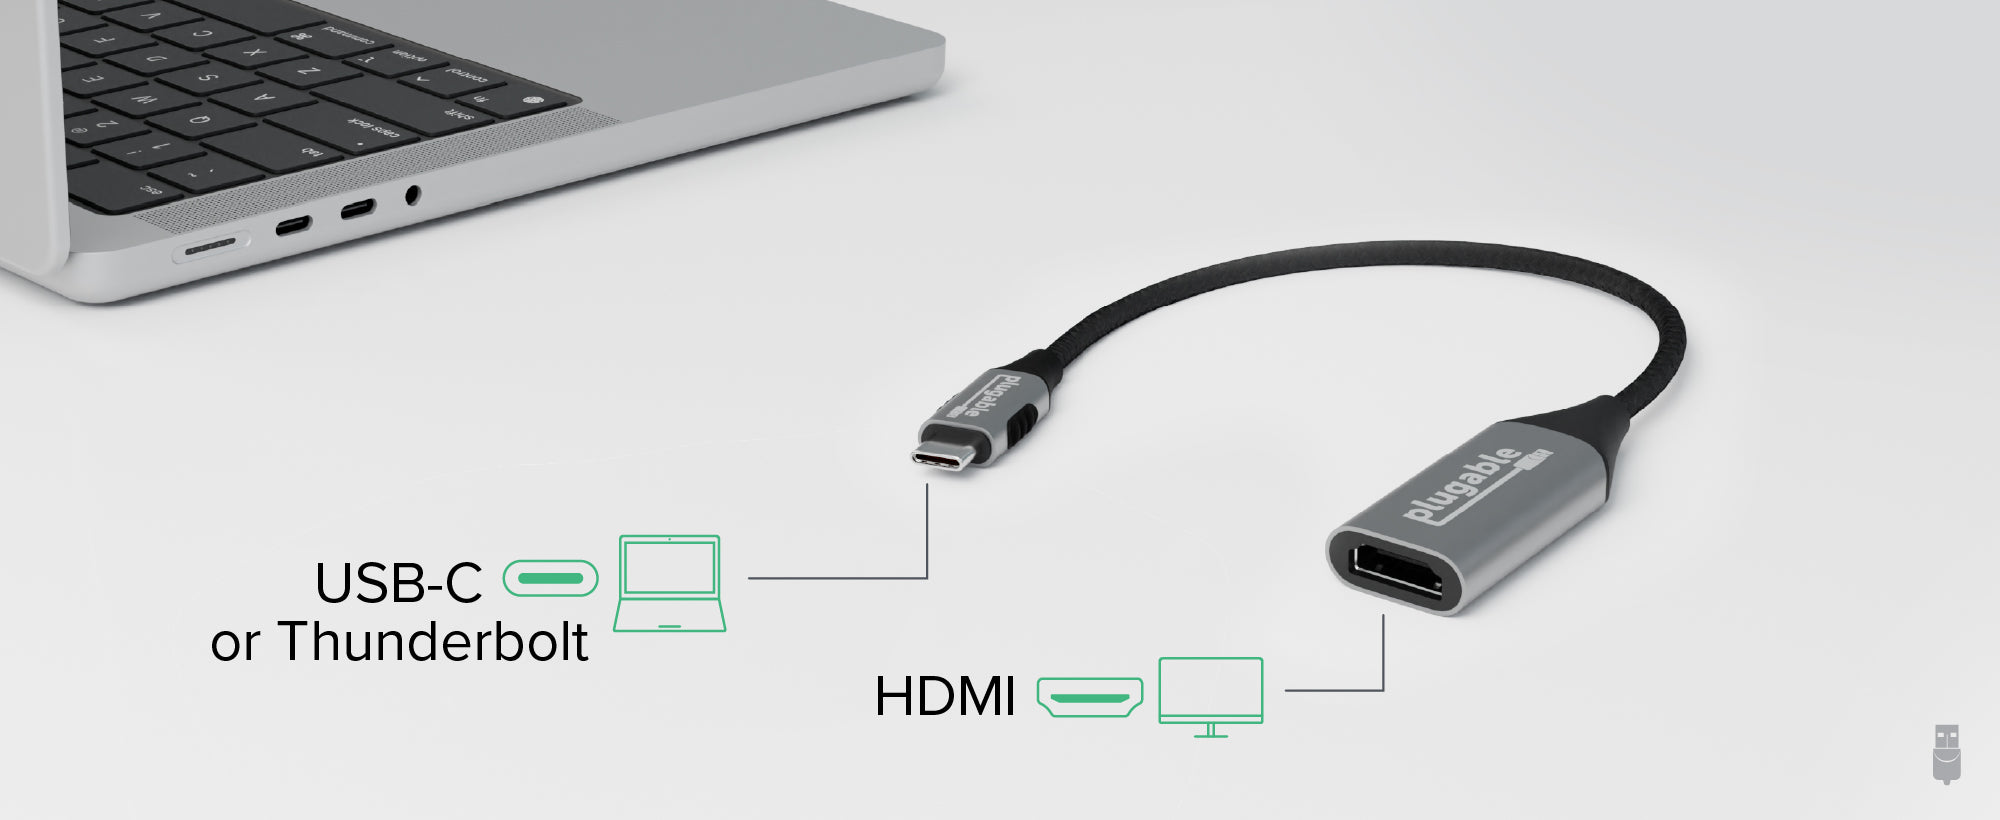 The Plugable USBC-HDMI8K next to a laptop. The image shows that you can connect the USBC-HDMI8K adapter to either a 'USB-C' port or a 'Thunderbolt' port on the host laptop. The HDMI side shows a monitor with the HDMI connector.